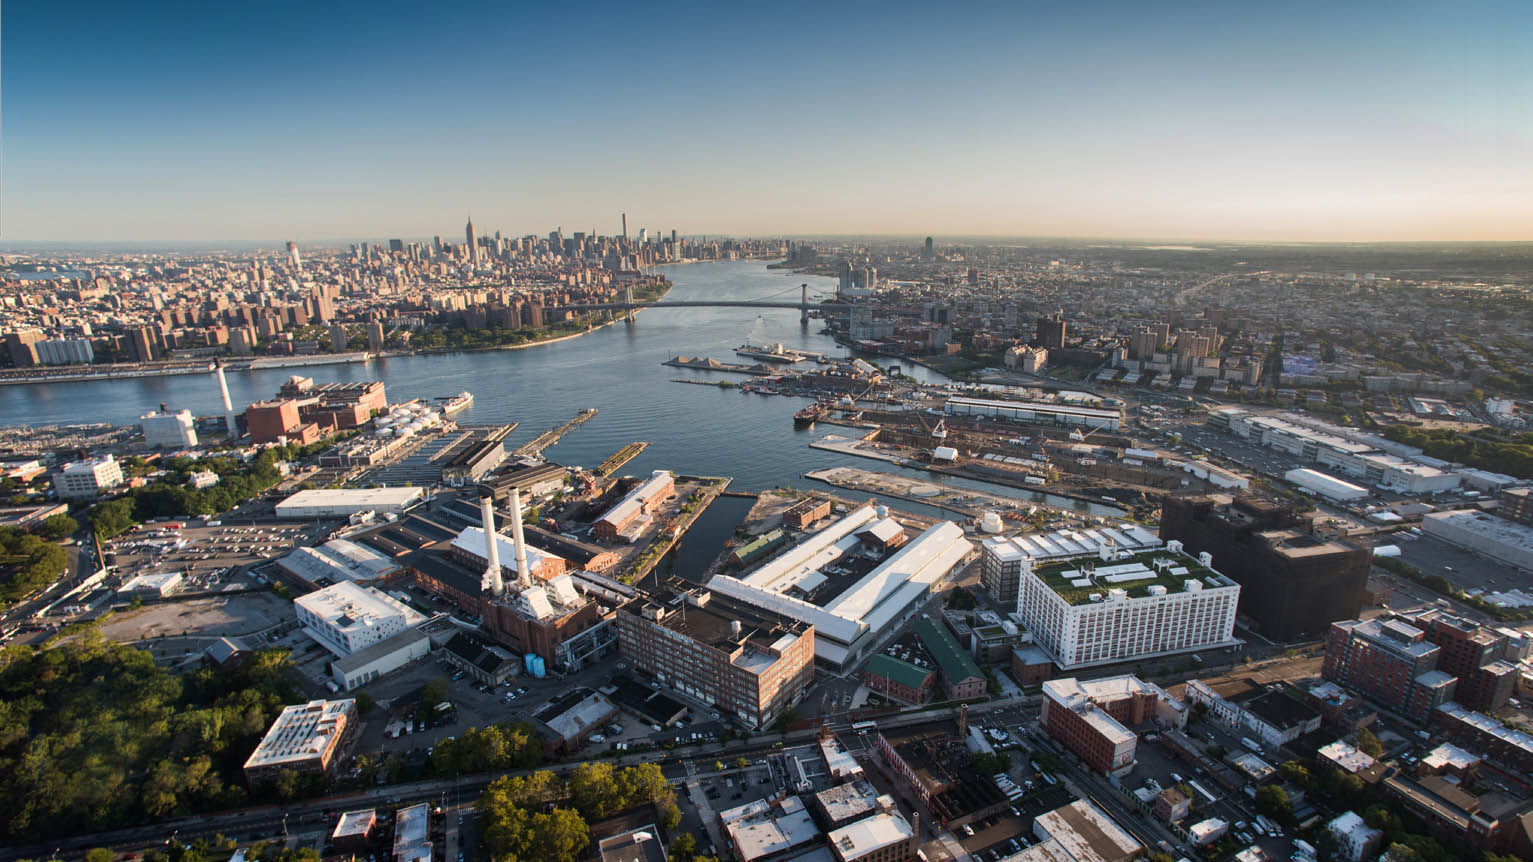 Brooklyn Navy Yard, Industry City and Harlem Biospace Lead Way in New Manufacturing in NYC